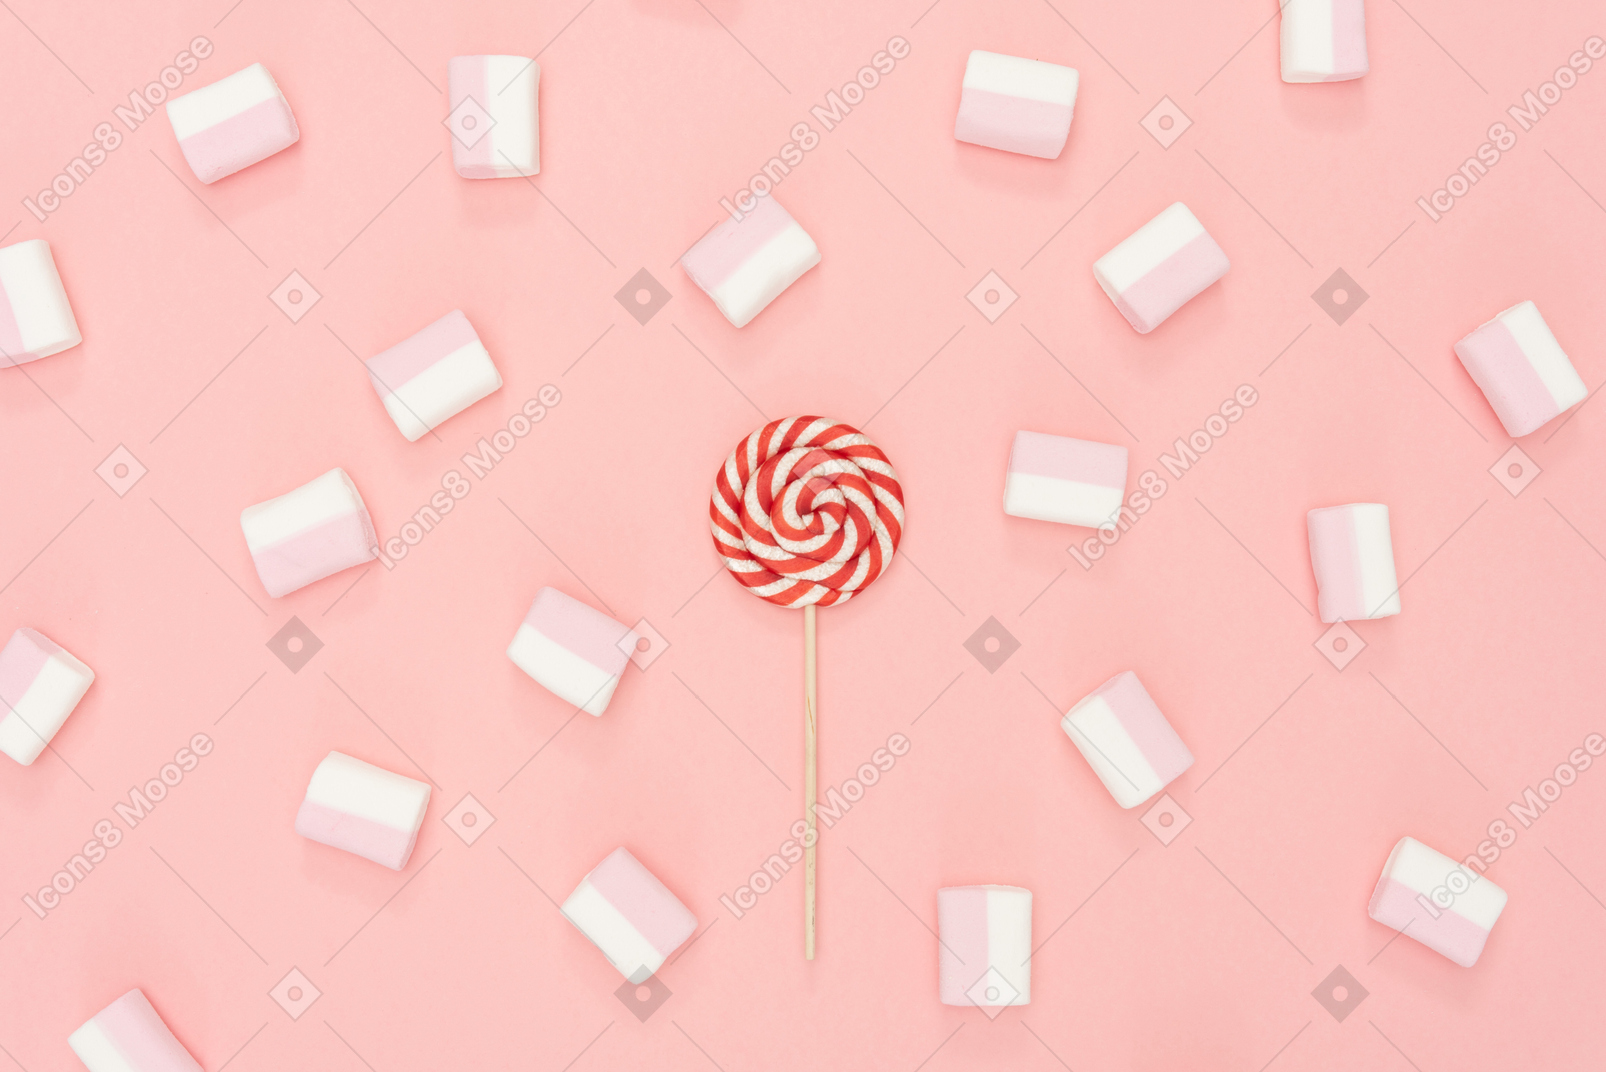 Nice lollipop and scattered marshmallows on pink background